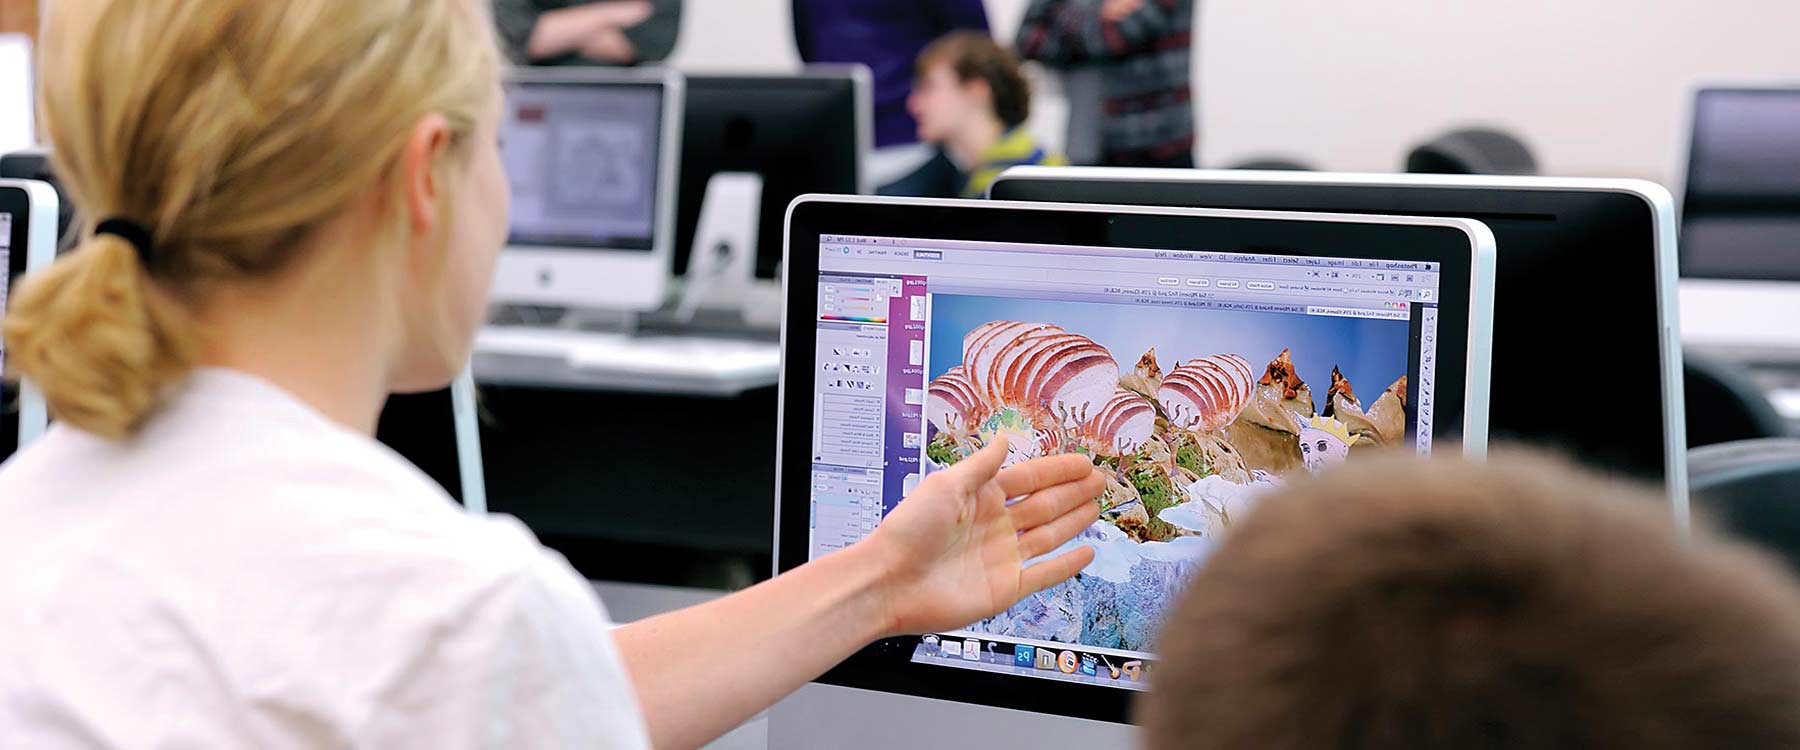 A student points to an iMac screen. On the screen is an eclectic and colorful design.